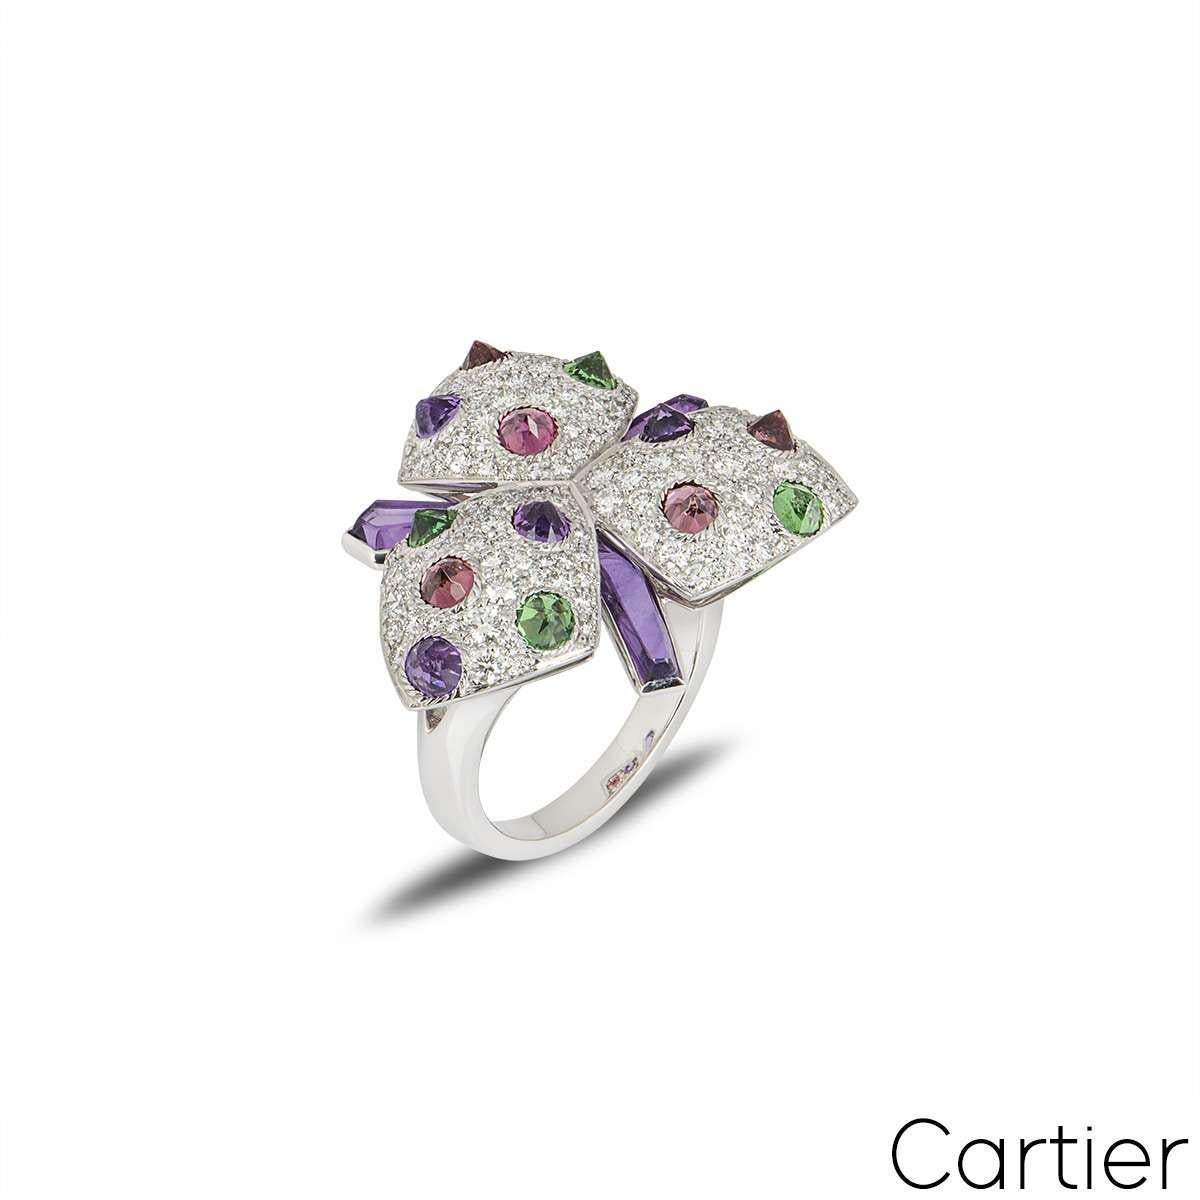 A striking dress ring from the Caresse d'Orchidées collection by Cartier. The ring features pave diamonds and reverse set amethysts, pink tourmalines and tsavorites. The diamonds have a total weight of approximately 0.40ct and the gemstones have an